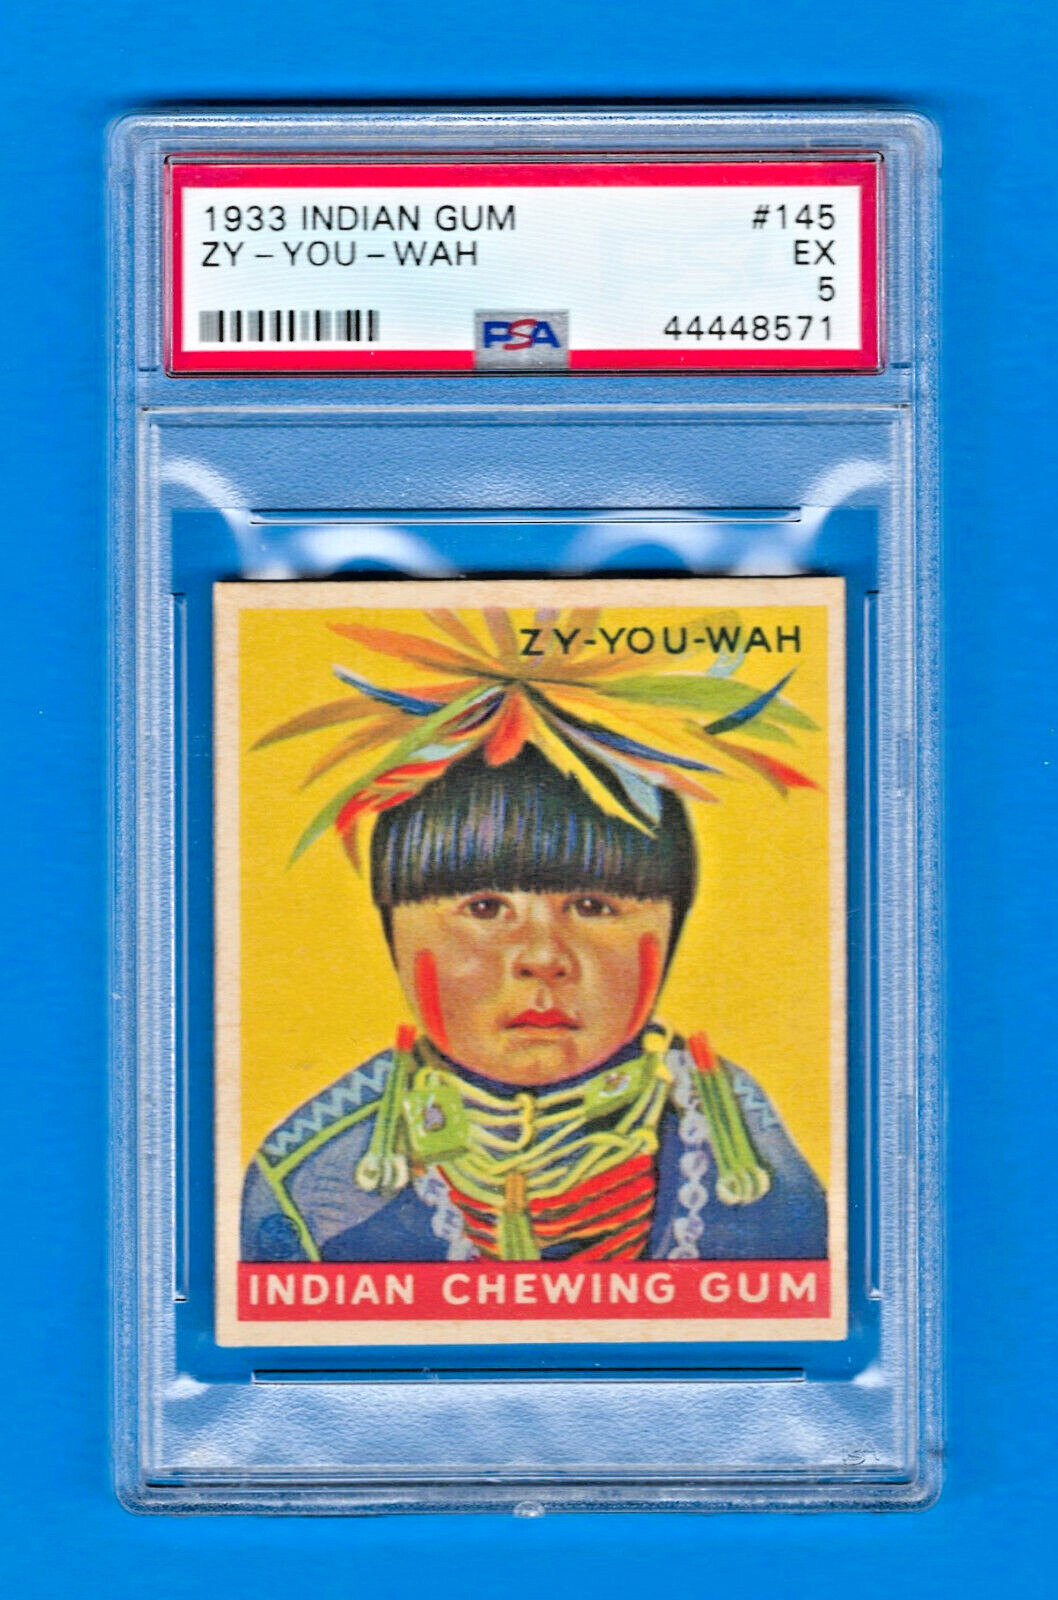 1933 R73 Goudey Indian Gum Card  #145 - ZY-YOU-WAH - Series 216 - PSA 5 - EX